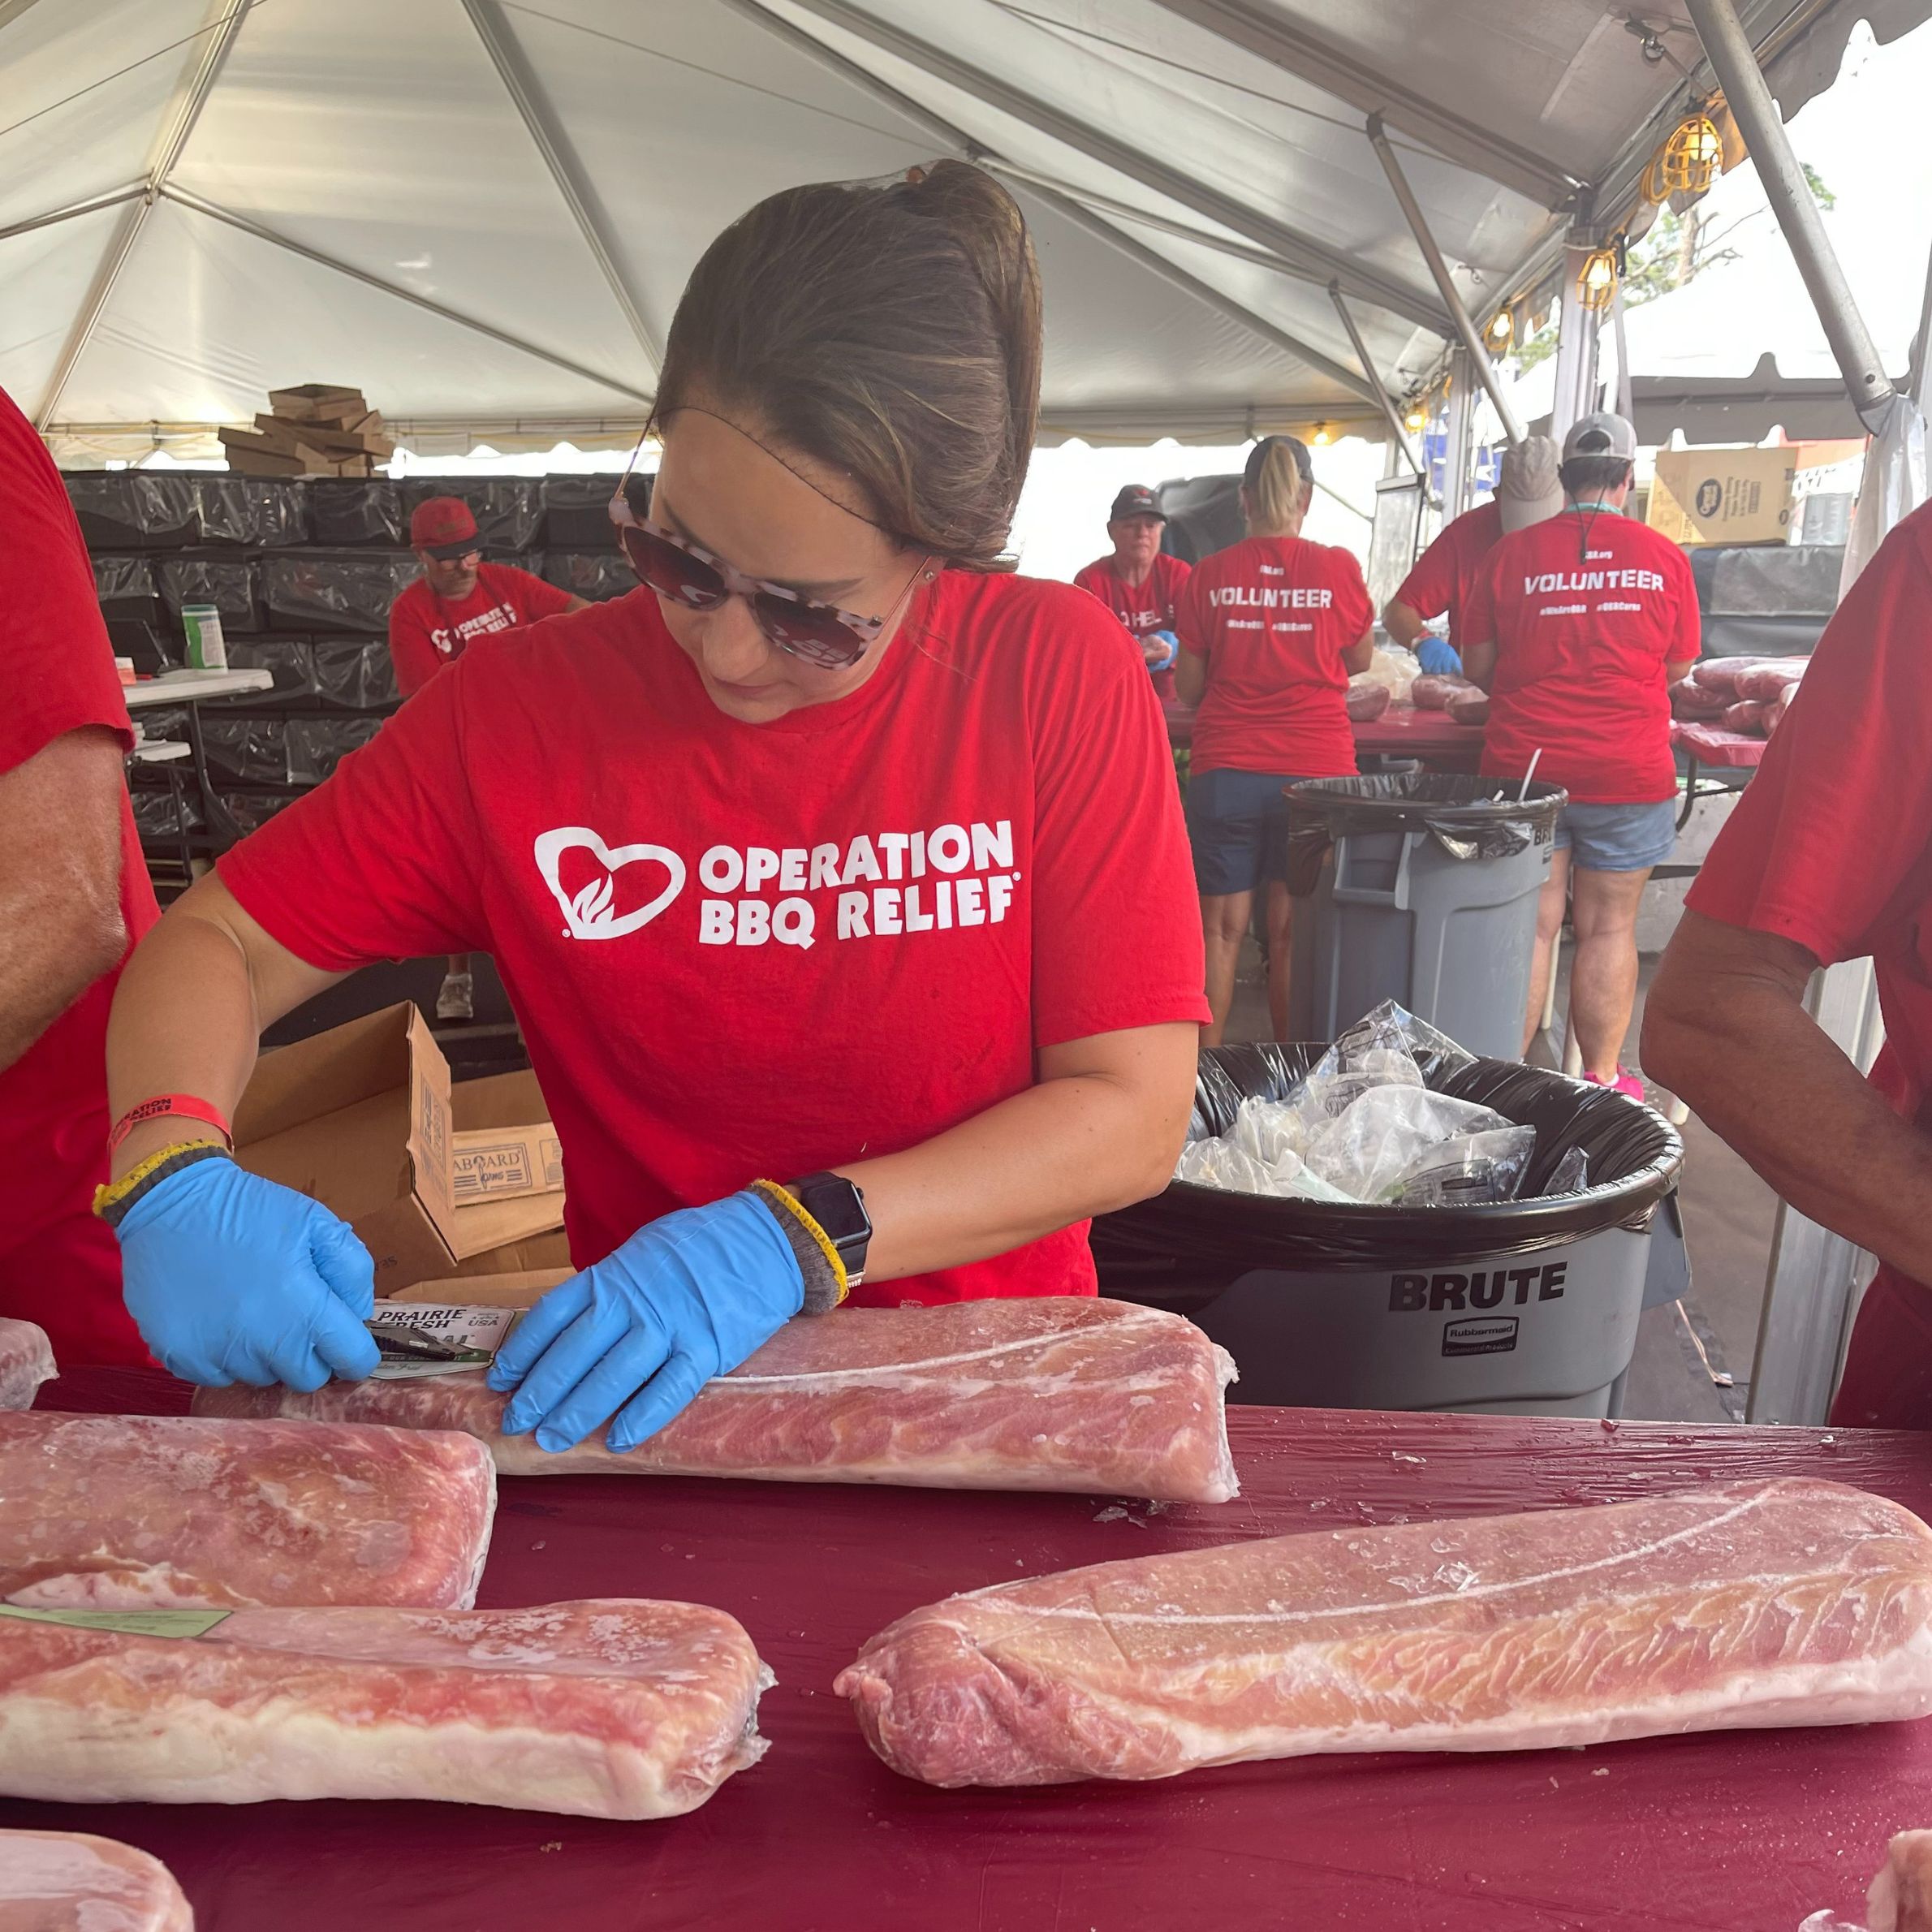 Chief Kindness Officer Tara Boyle prepares ribs for Operation BBQ Relief after Hurricane Idalia.